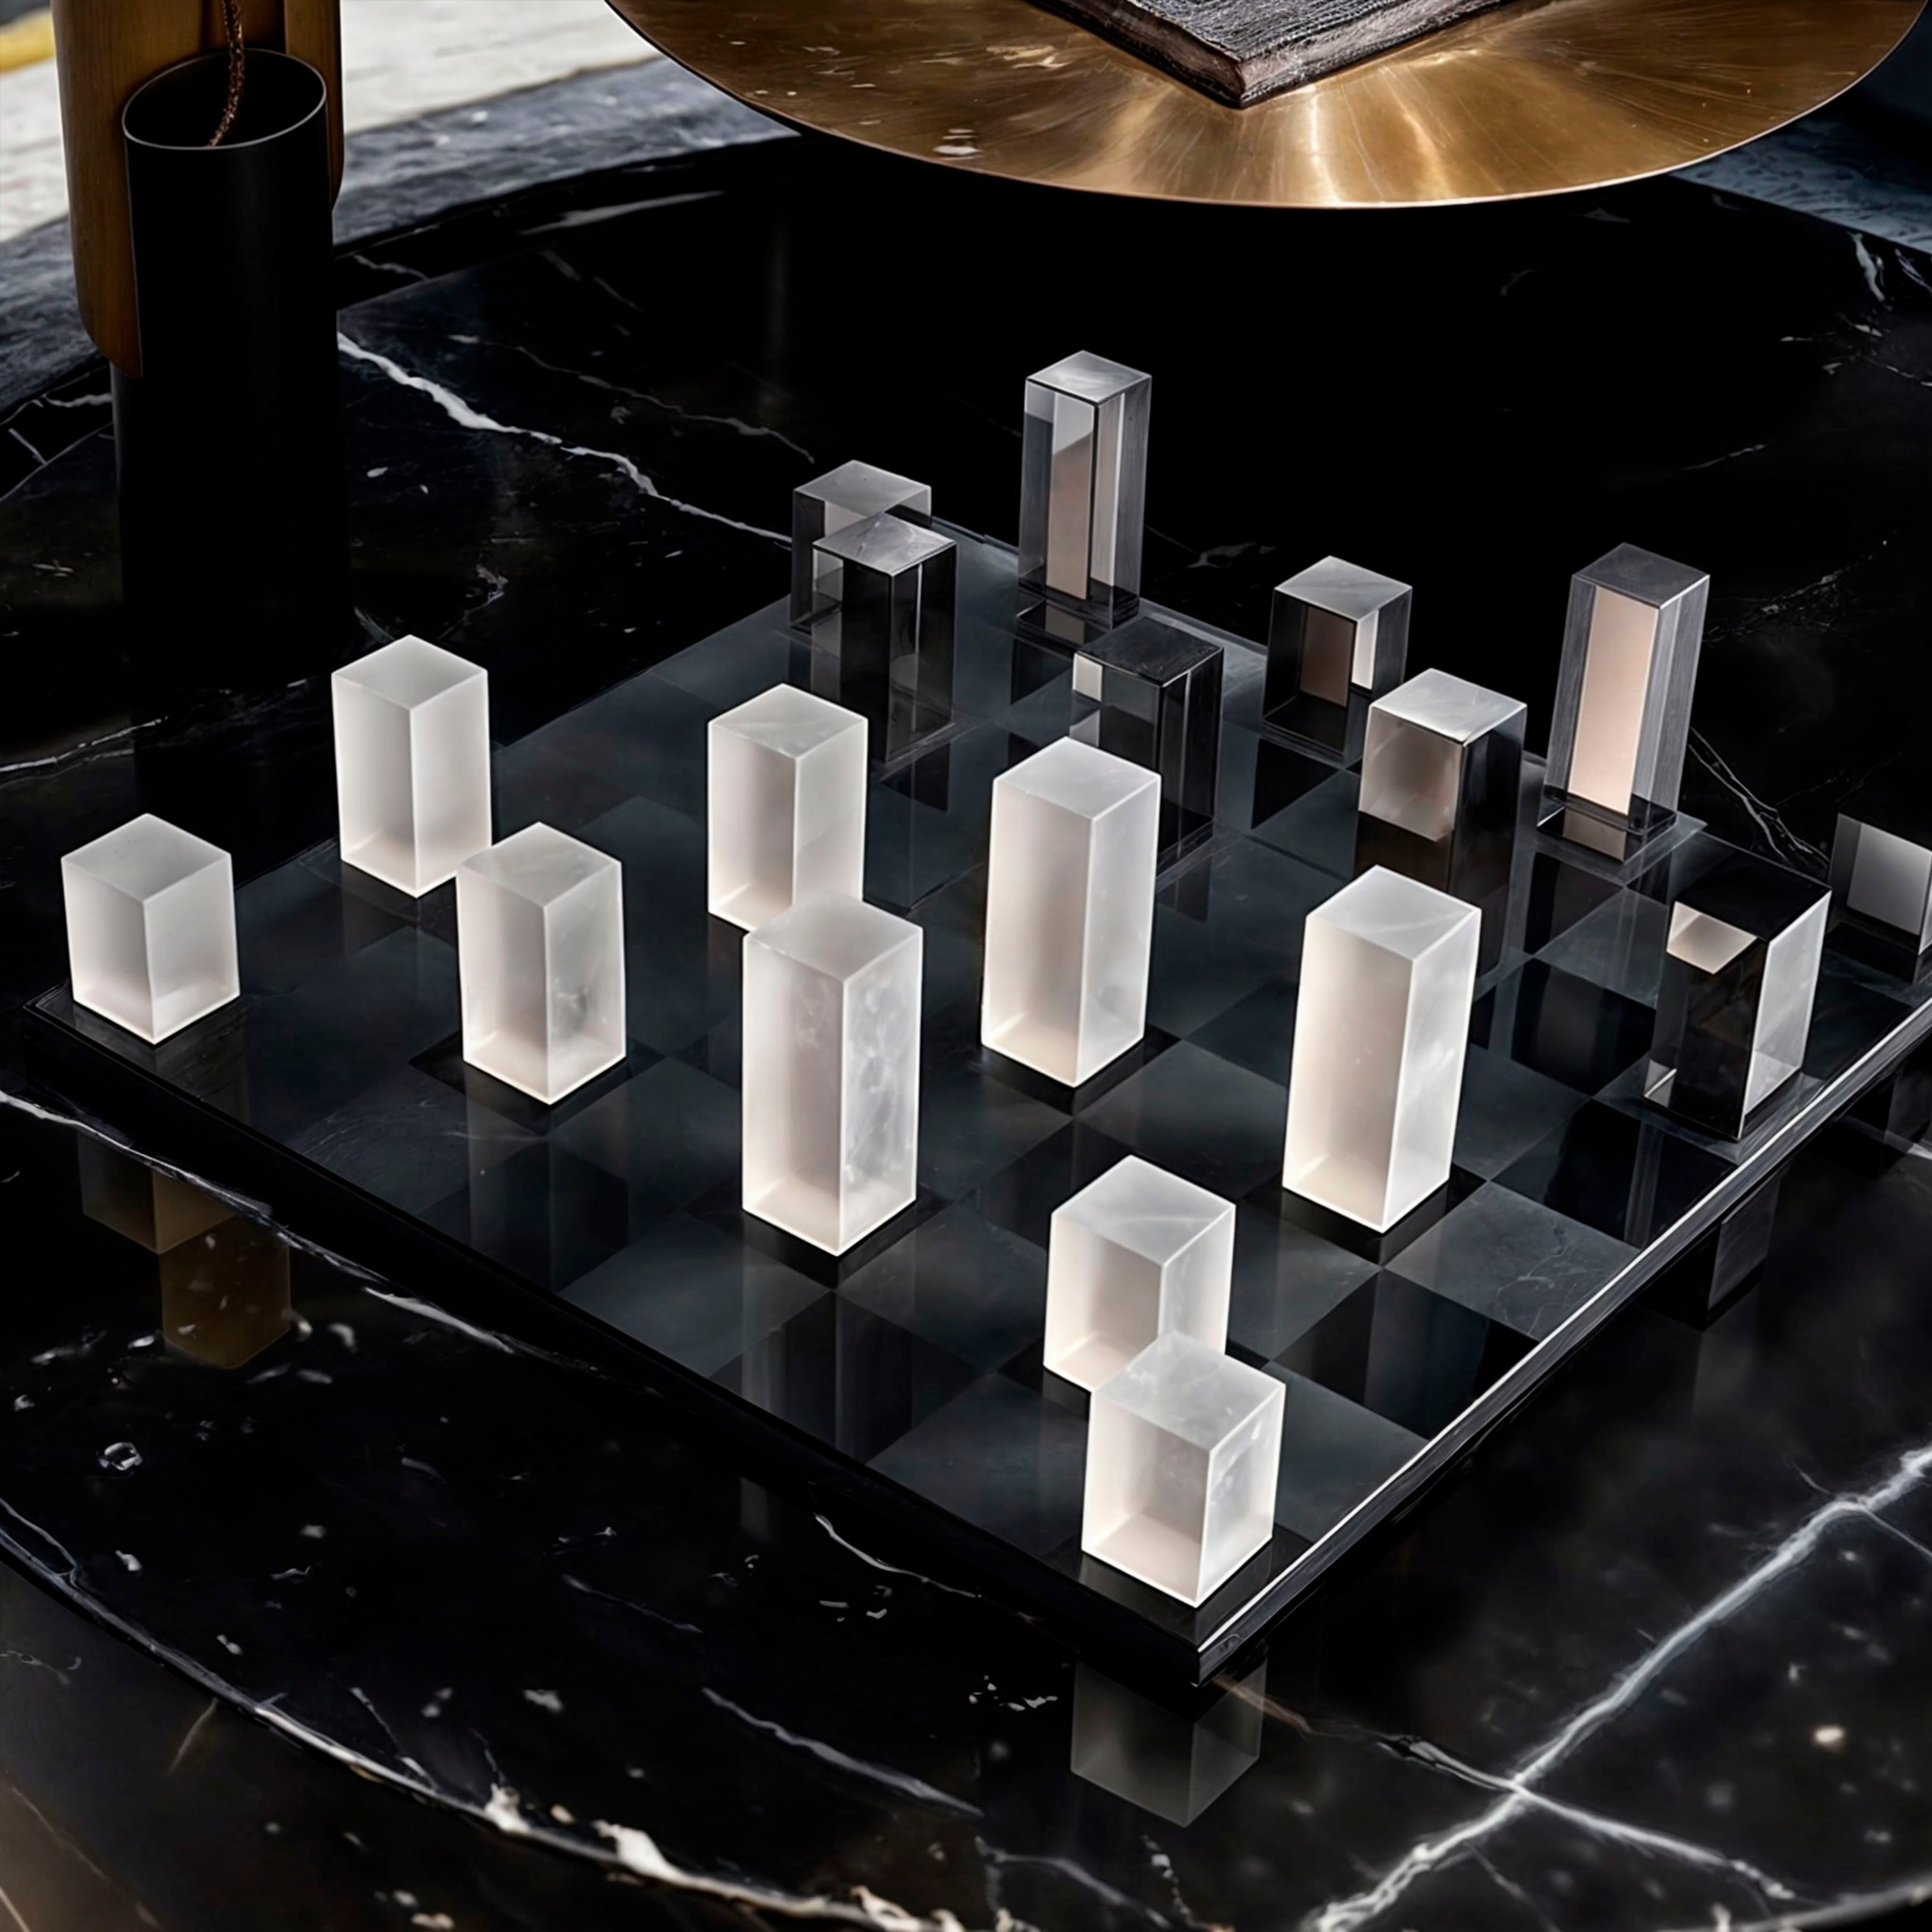 The Marble Chess